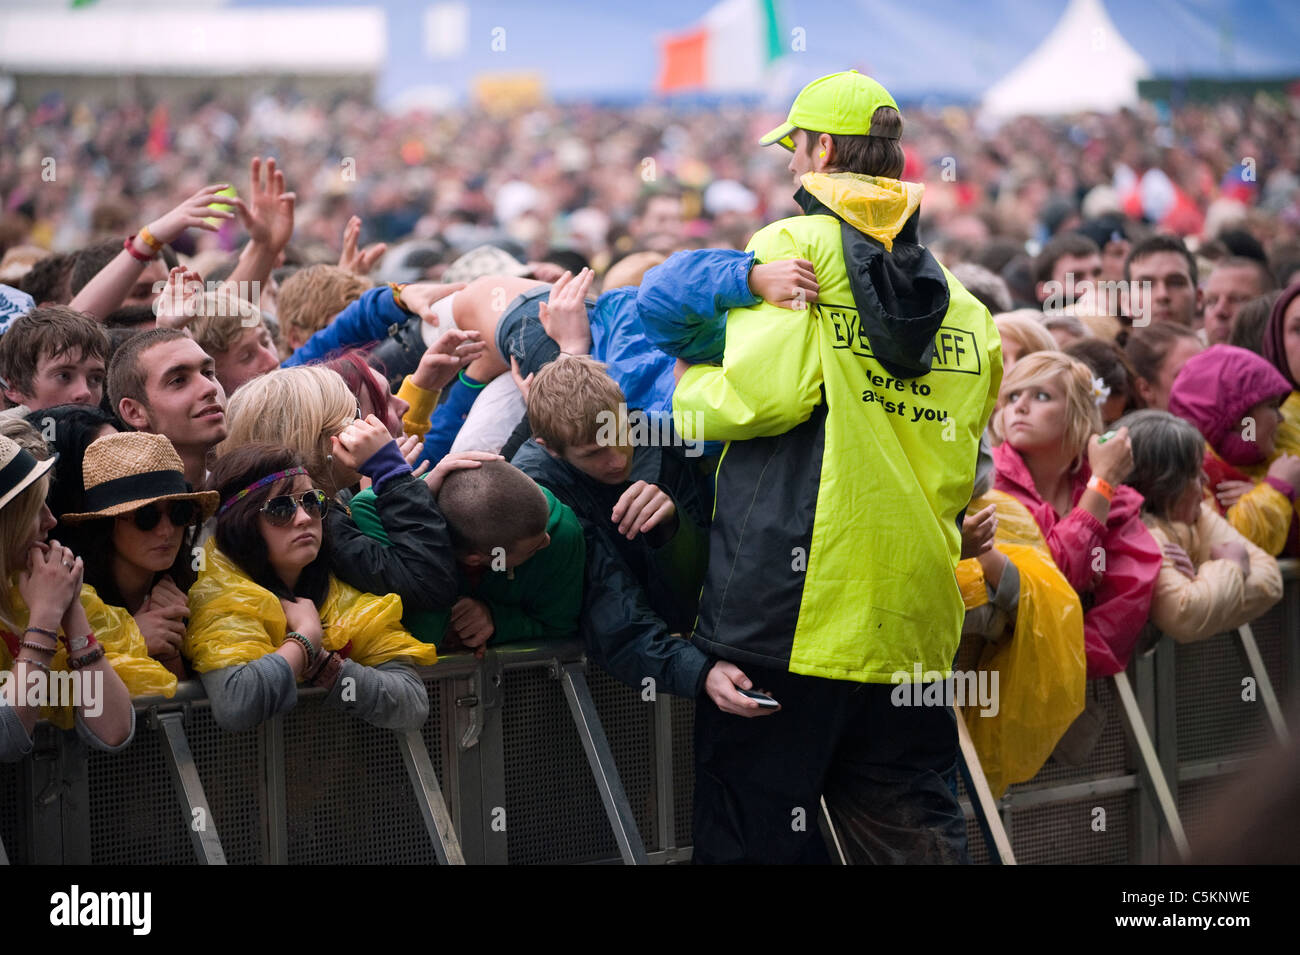 A crowd surfing fan is helped by festival security. Stock Photo